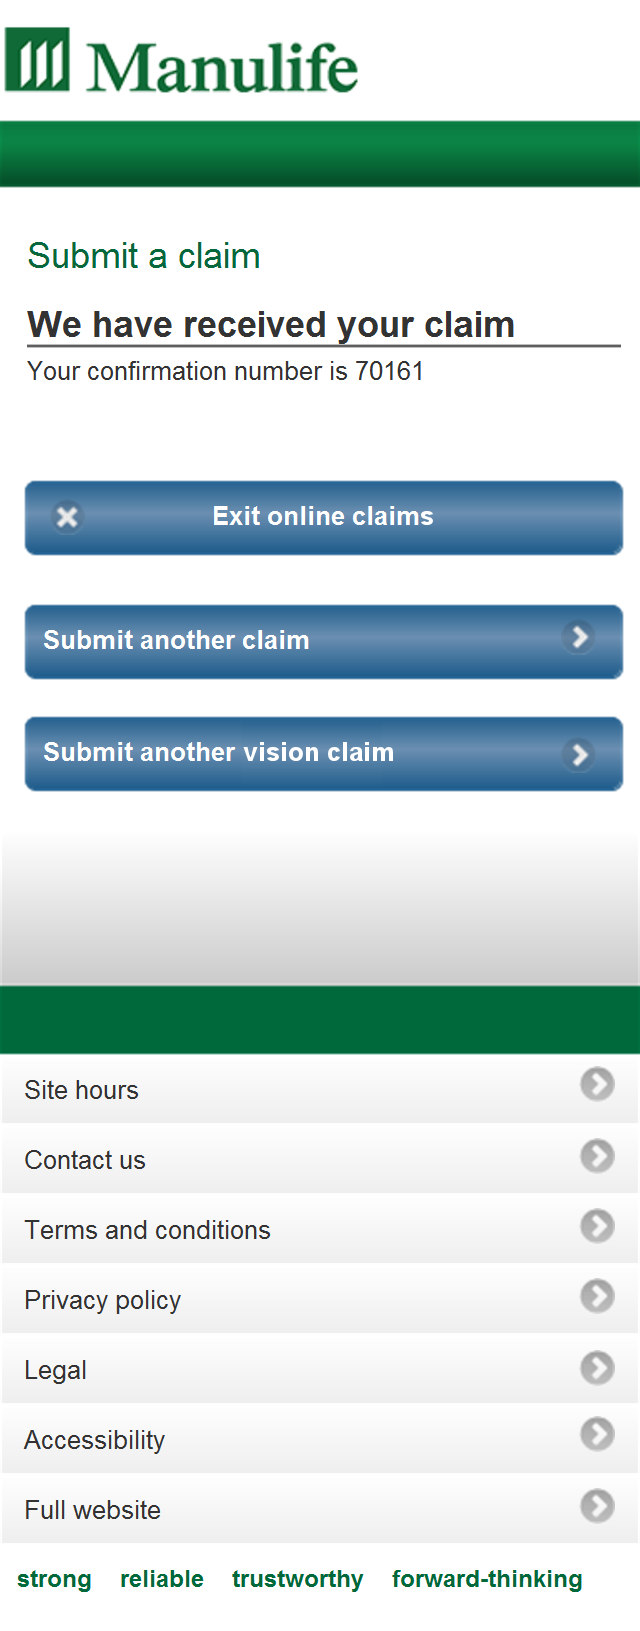 Submit a claim